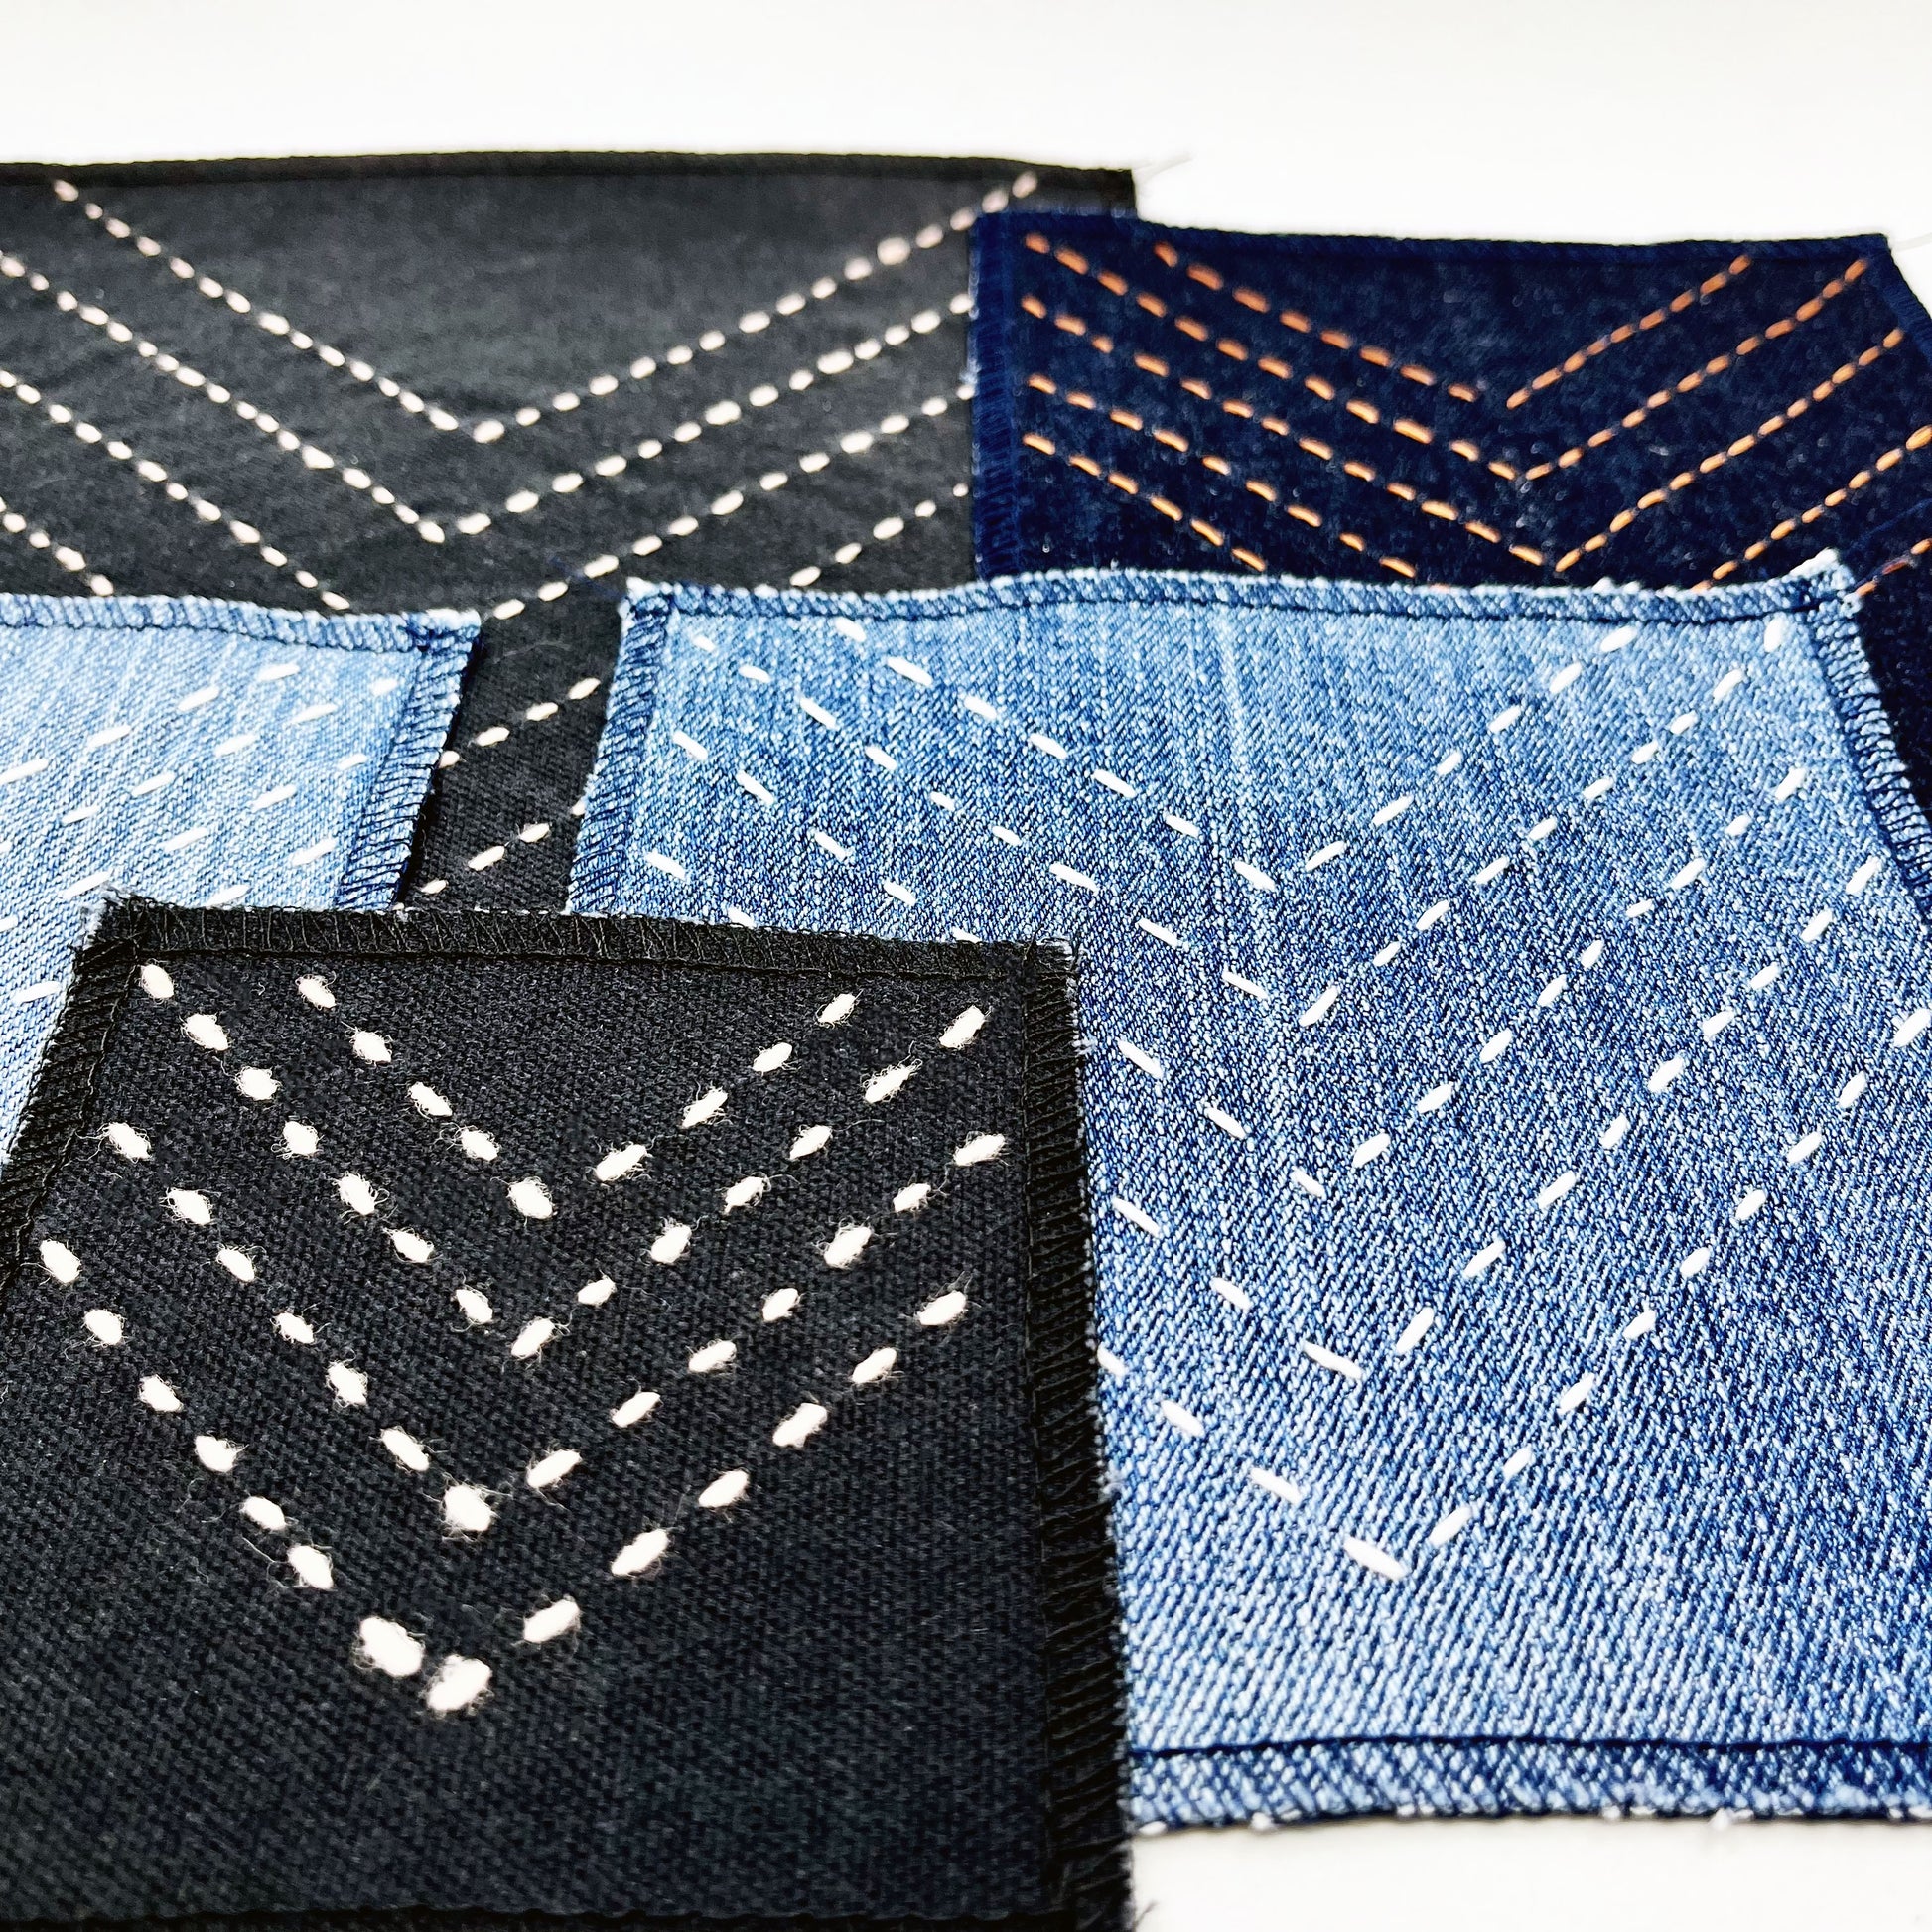 a group of square patches made out of denim and black canvas, handstitched with rows of copper (on the dark denim) ivory (on the denim) and peach (on the black) running stitches in a chevron pattern, with overlocked edges, on a white background